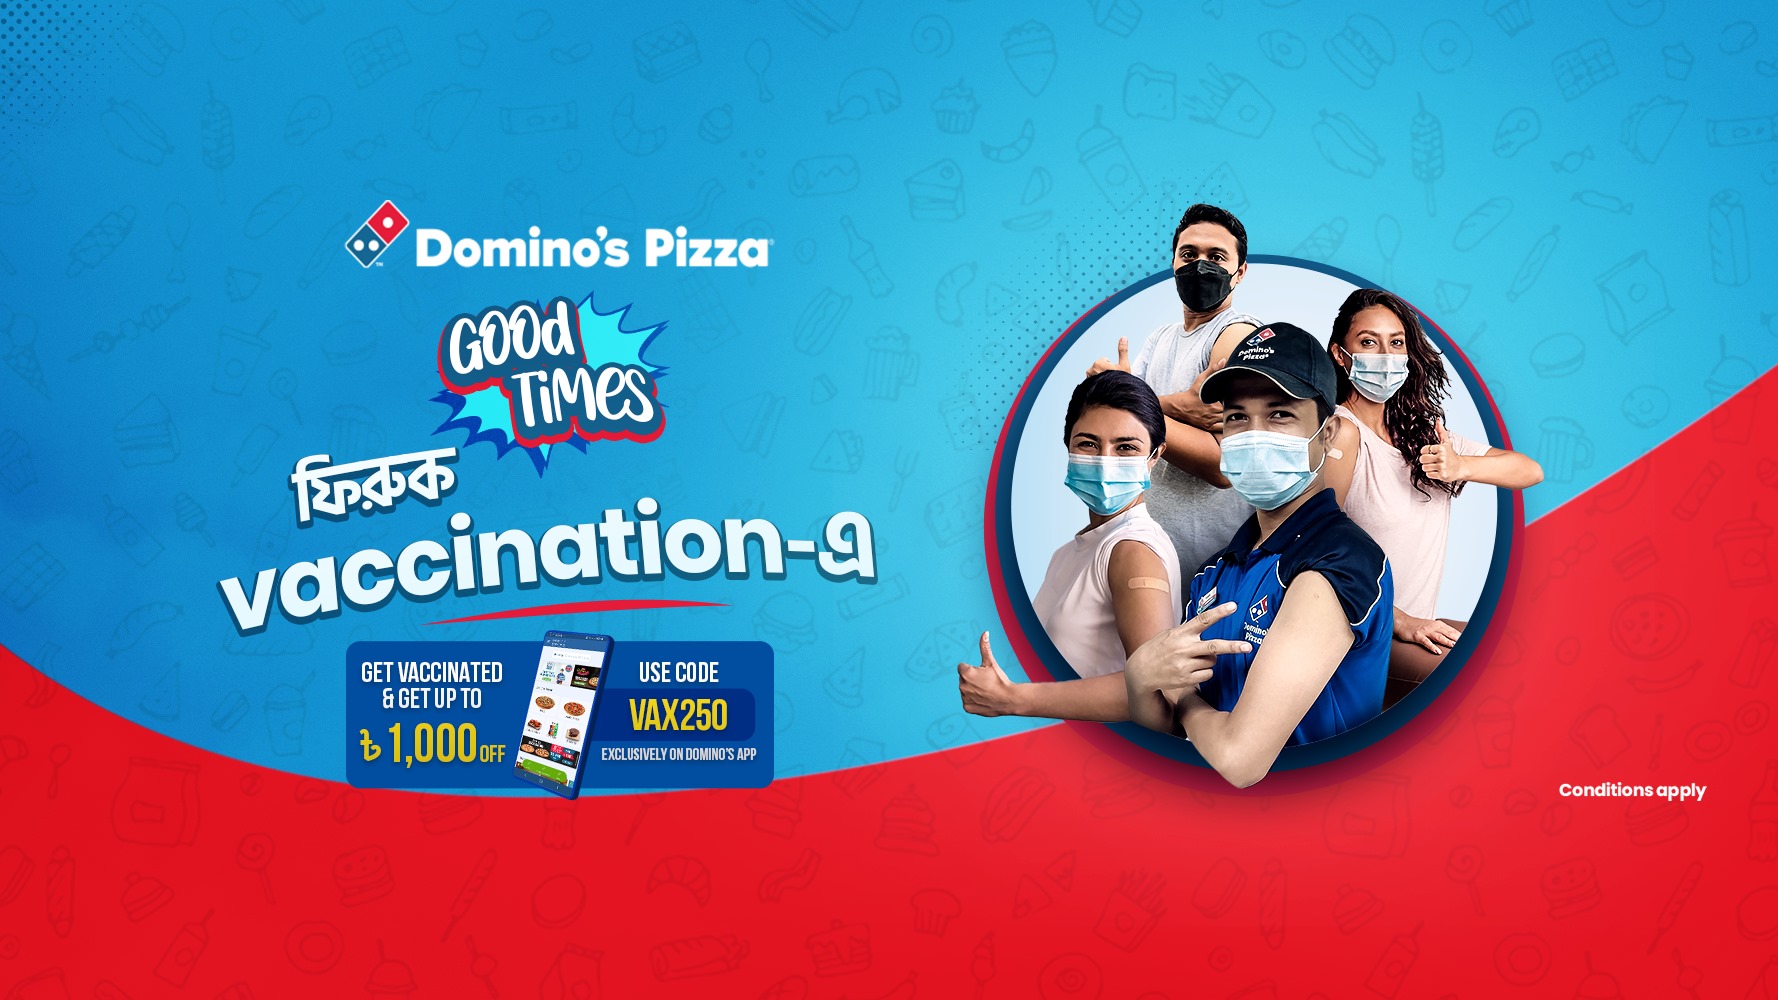 Vaccination dominos offer pizza Domino’s is